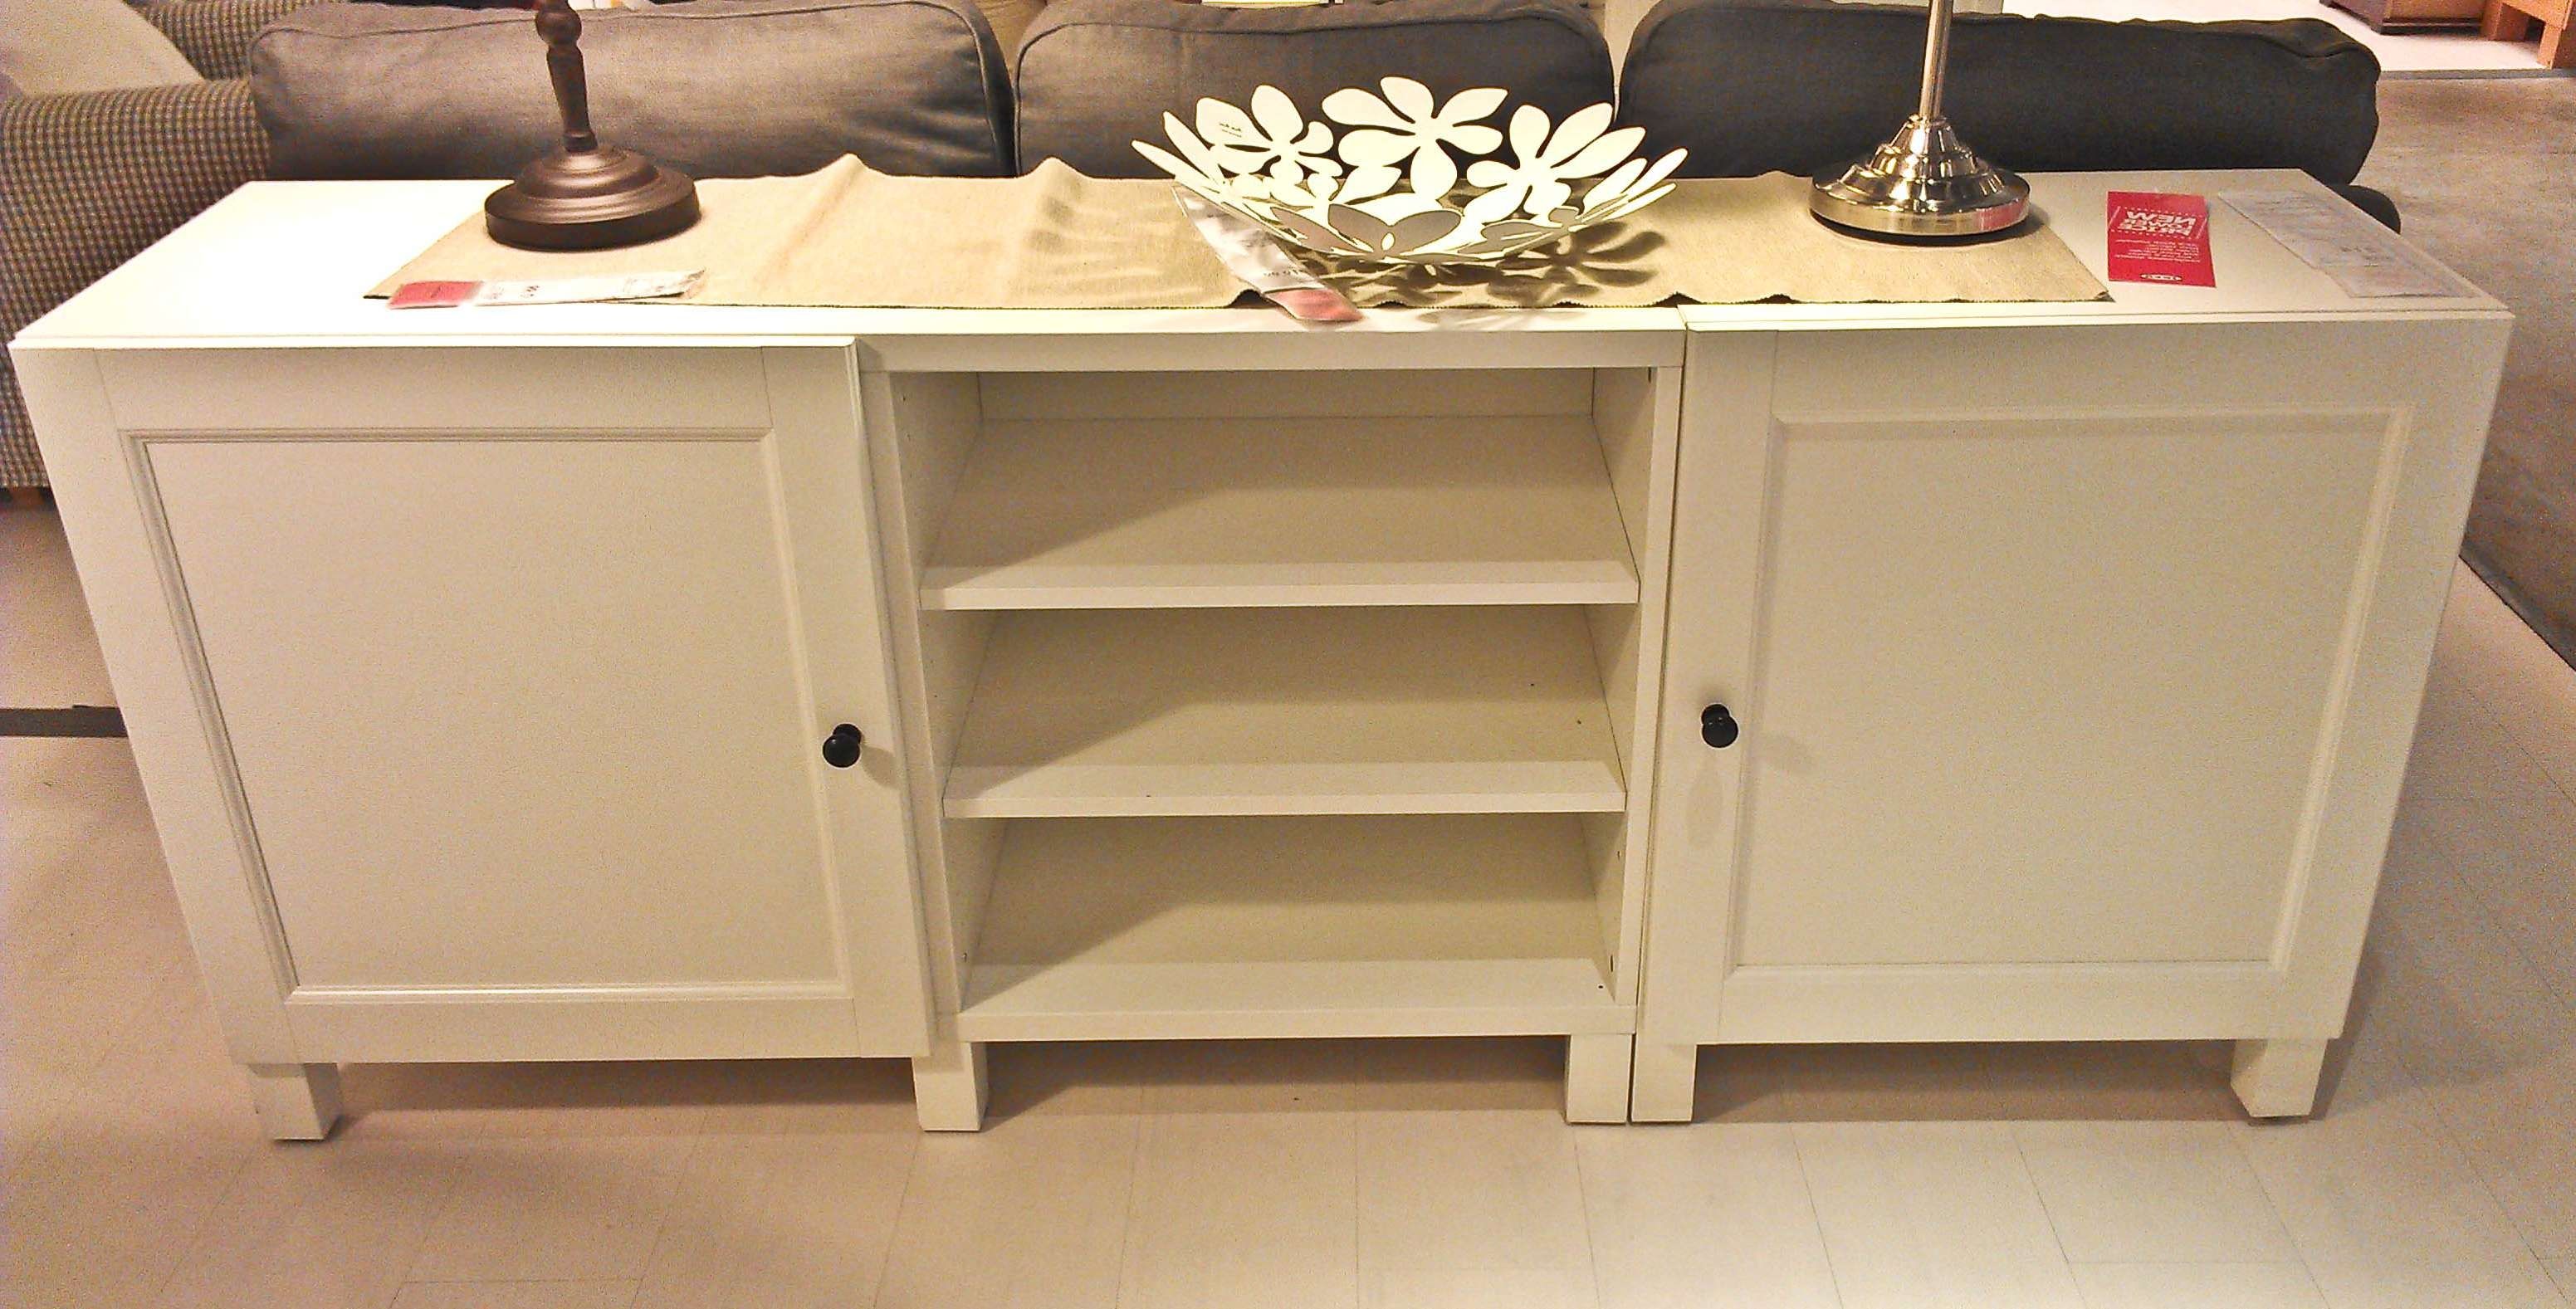 Antique White Buffet Table Dining Room Side Table Buffet White Throughout Thin White Sideboards (View 7 of 20)